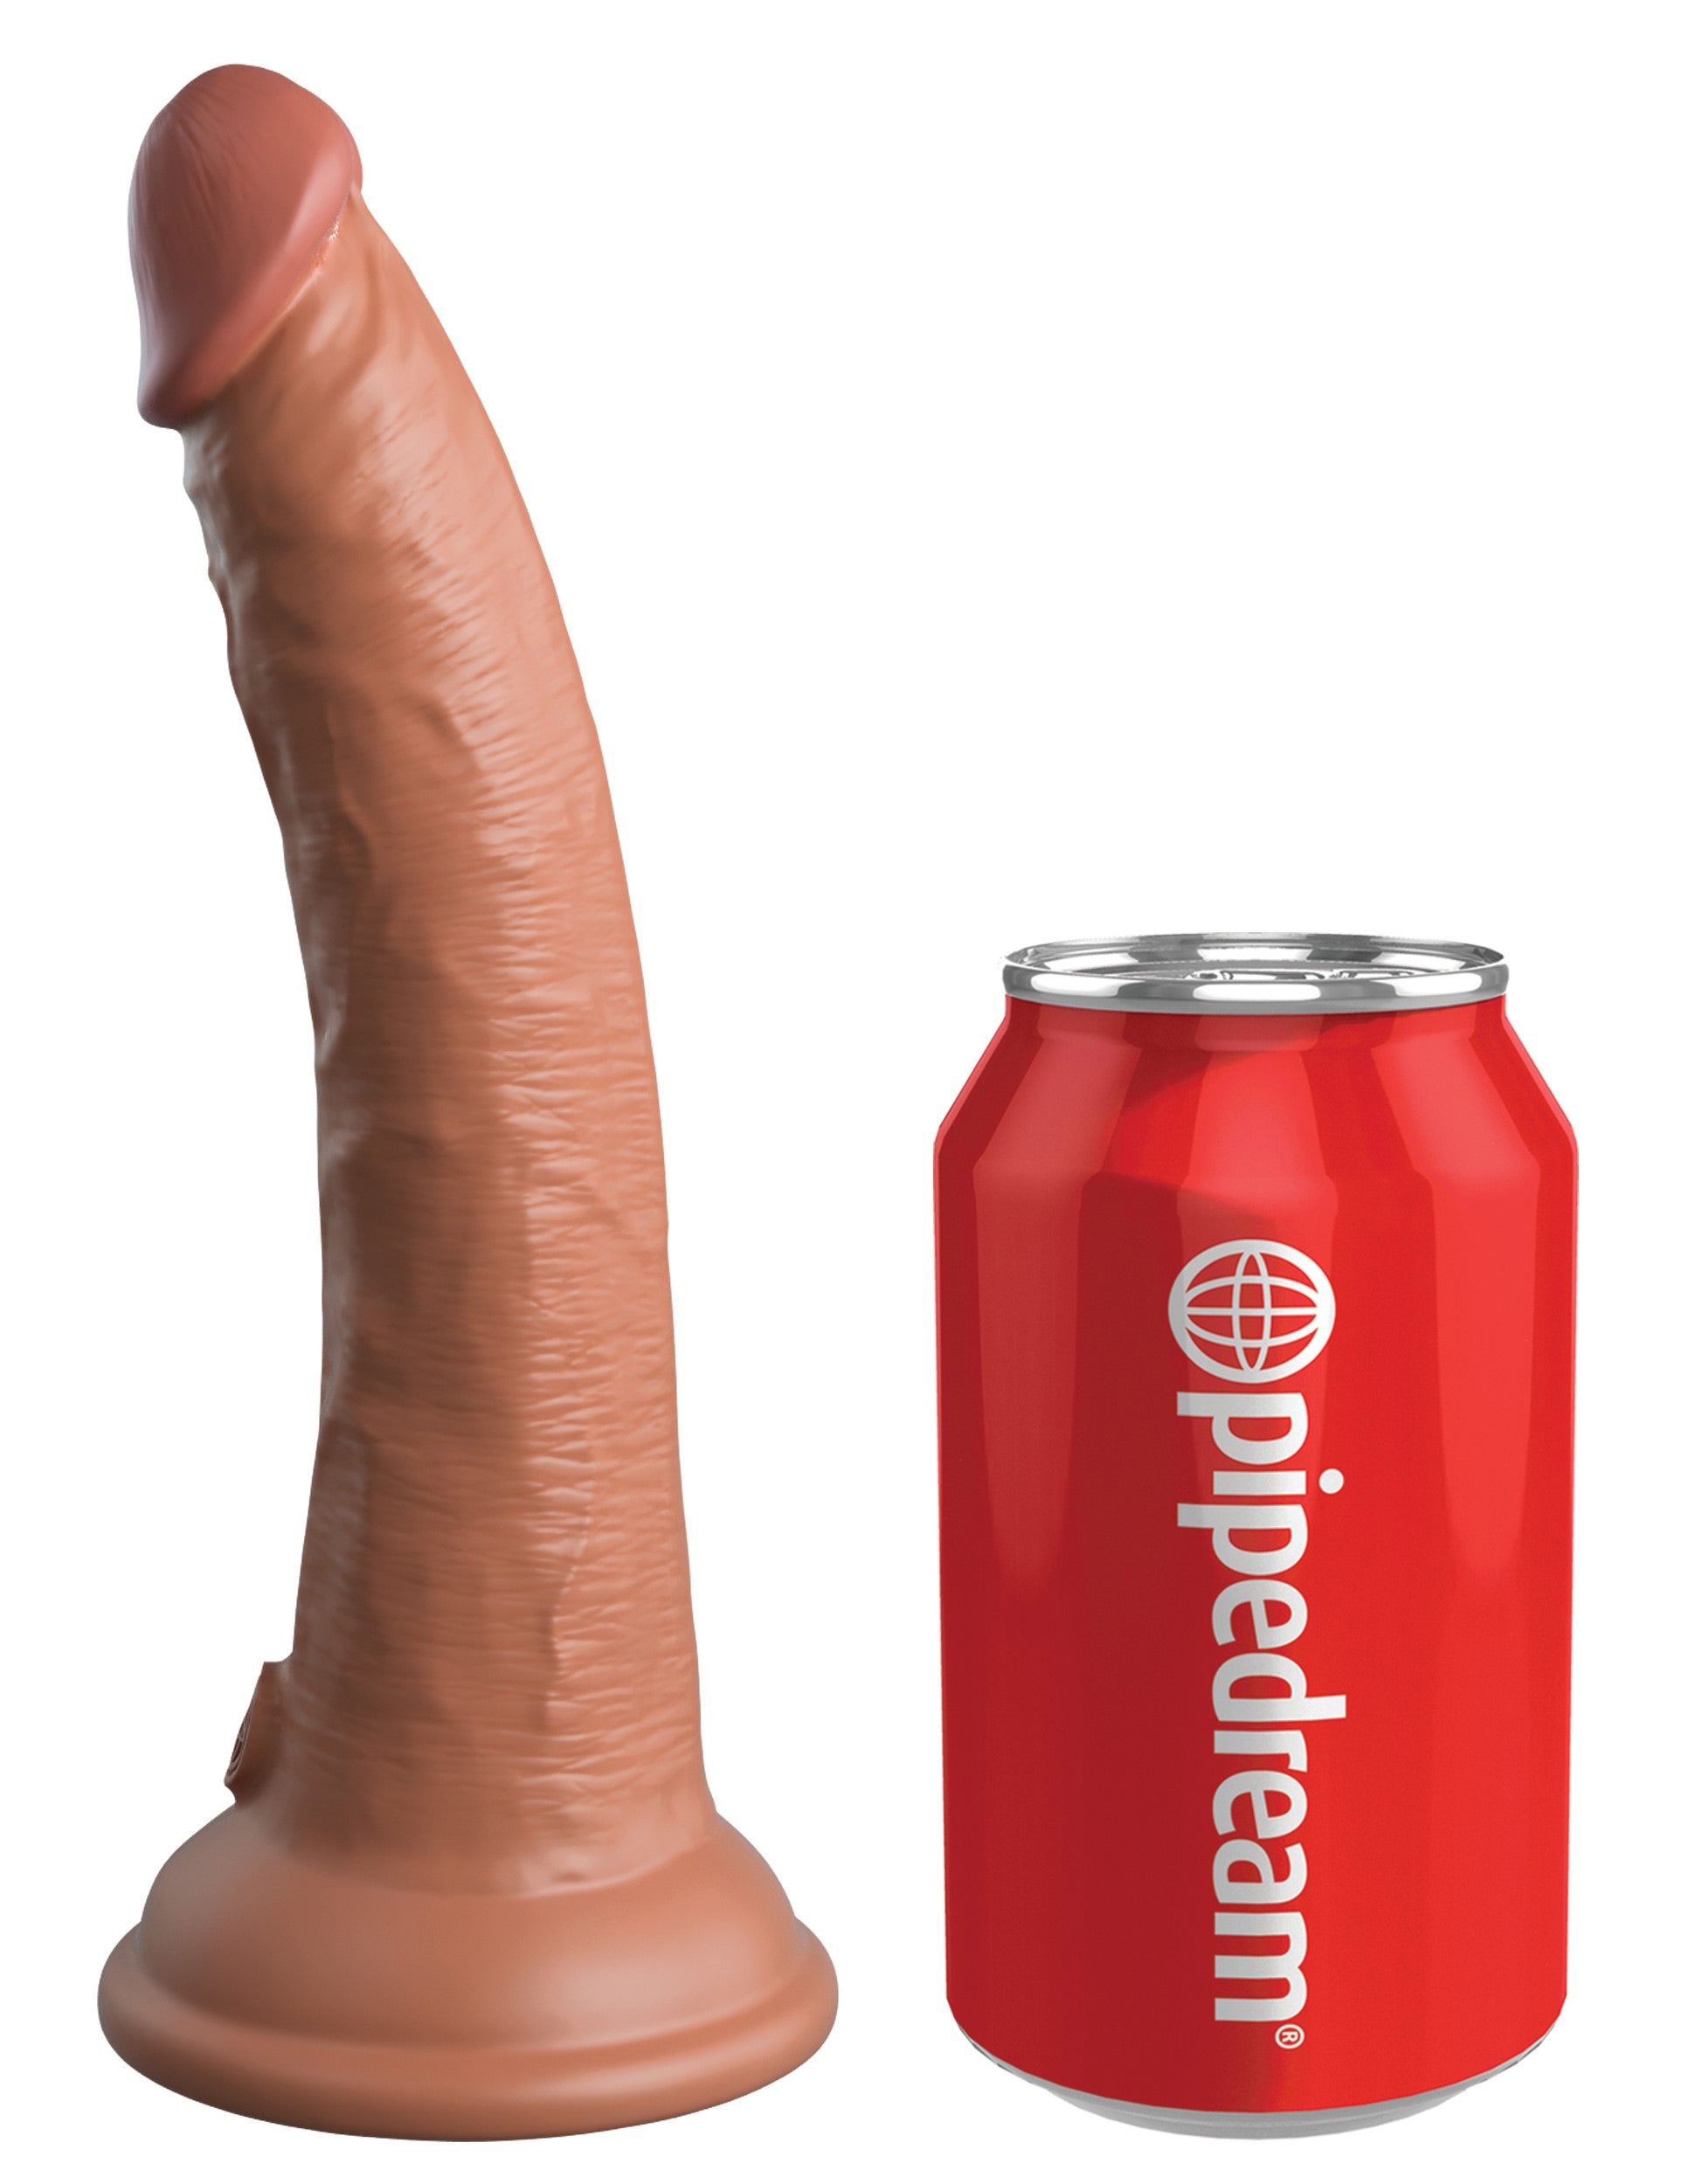 King Cock Elite 7 Inch Silicone Dual Density Cock